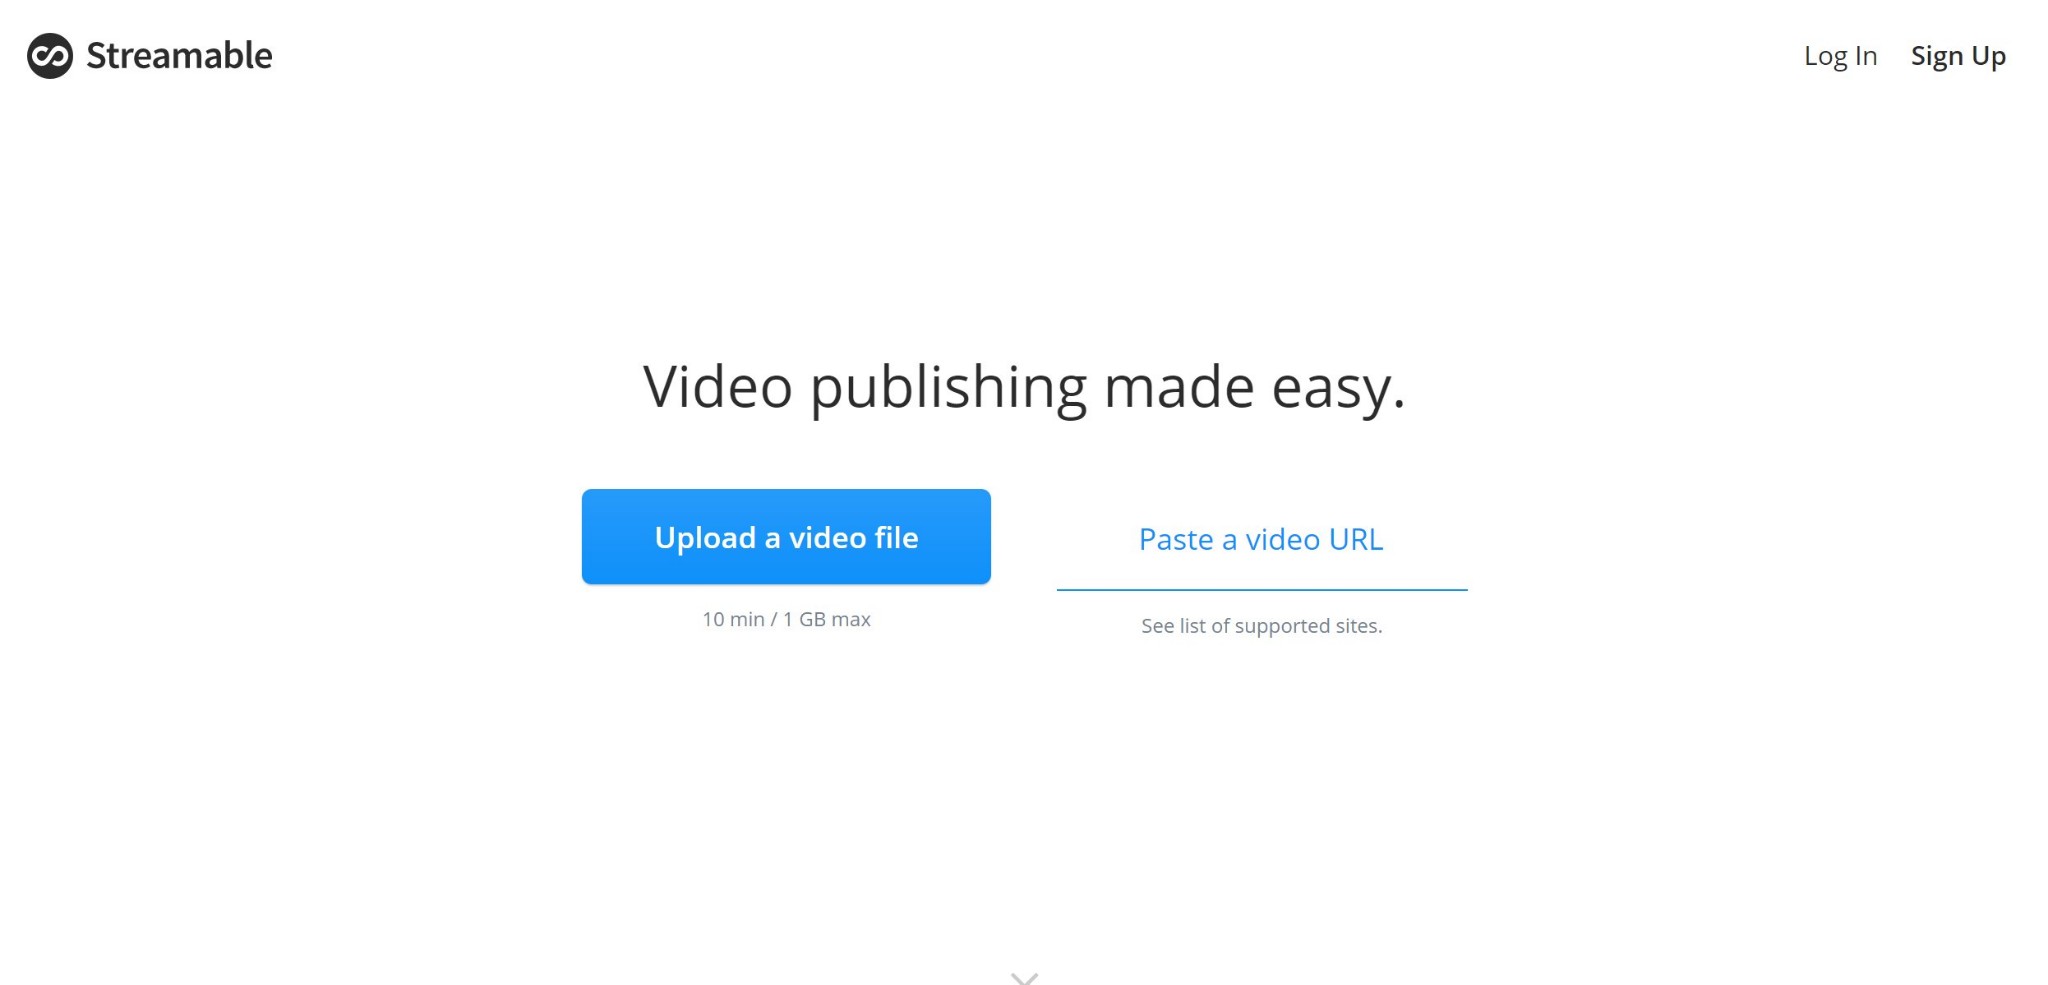 Download Streamable Video, A Perfect Option to Make It Available